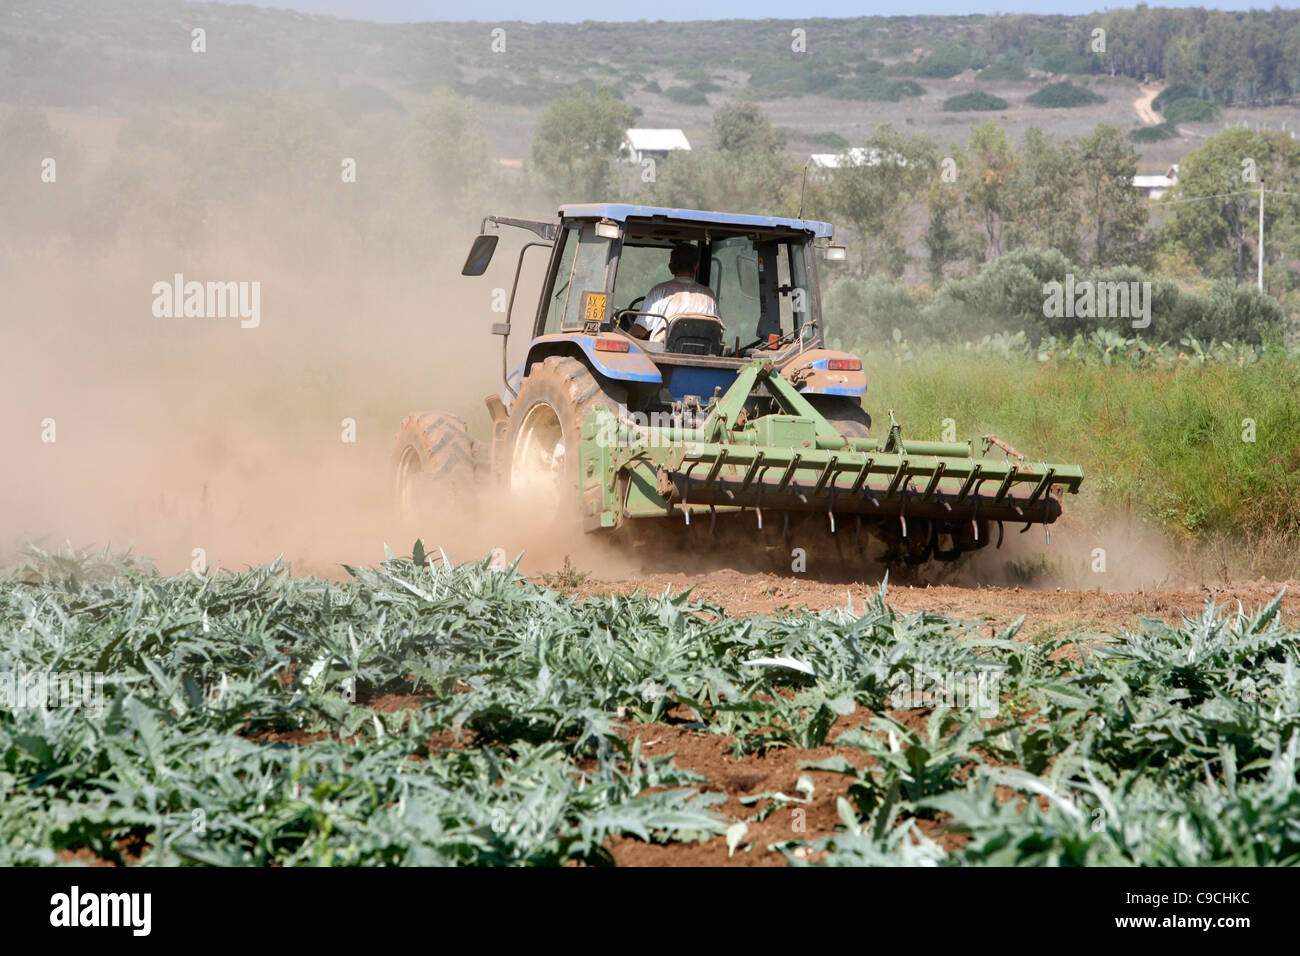 Tracktor working in a field at the Sinis Peninsula, Sardinia, Italy. Stock Photo